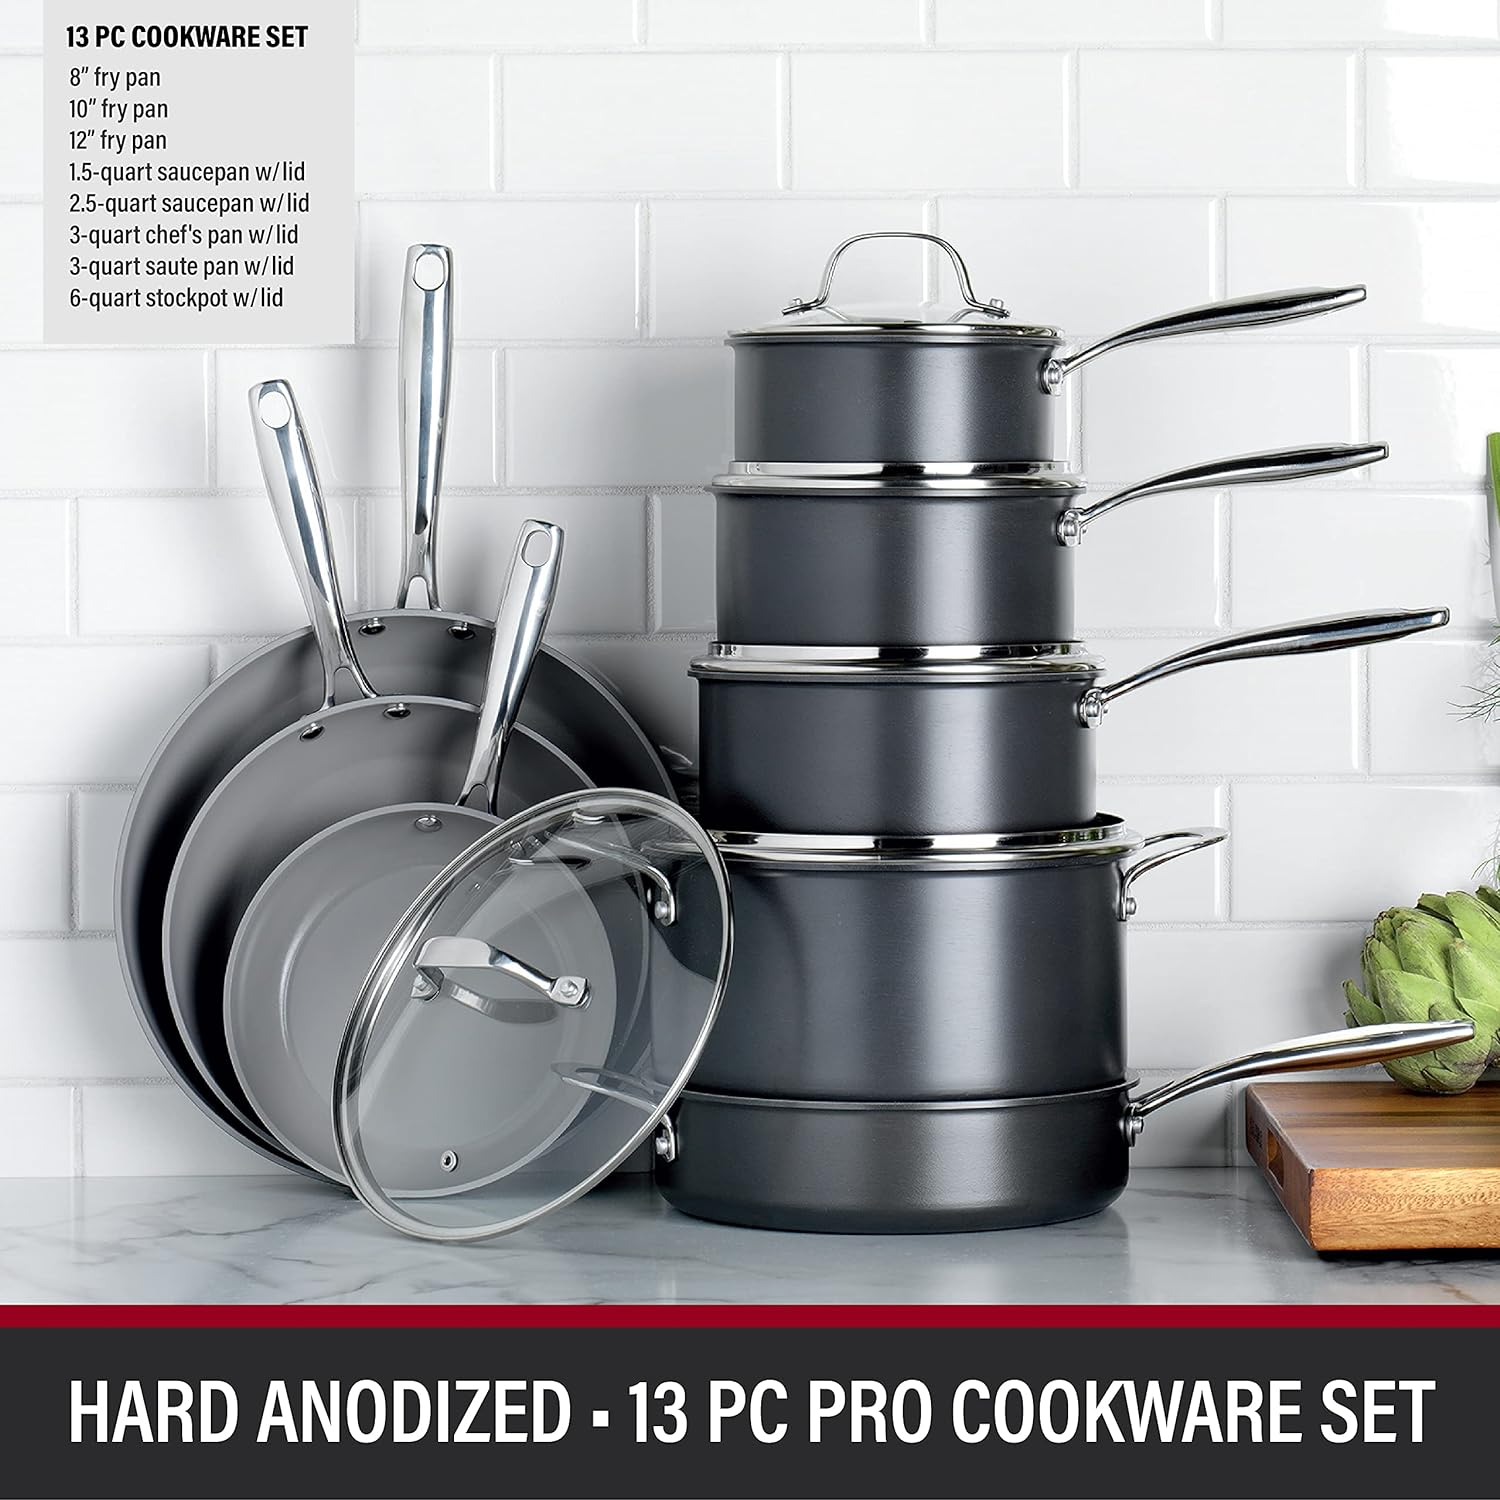 Granitestone Pro Hard Anodized Pots and Pans Set 13 Piece Premium Cookware Set with Ultra Nonstick Ceramic Diamond Coating, 100% PFOA Free, Stay Cool Handle, Oven  Dishwasher Safe